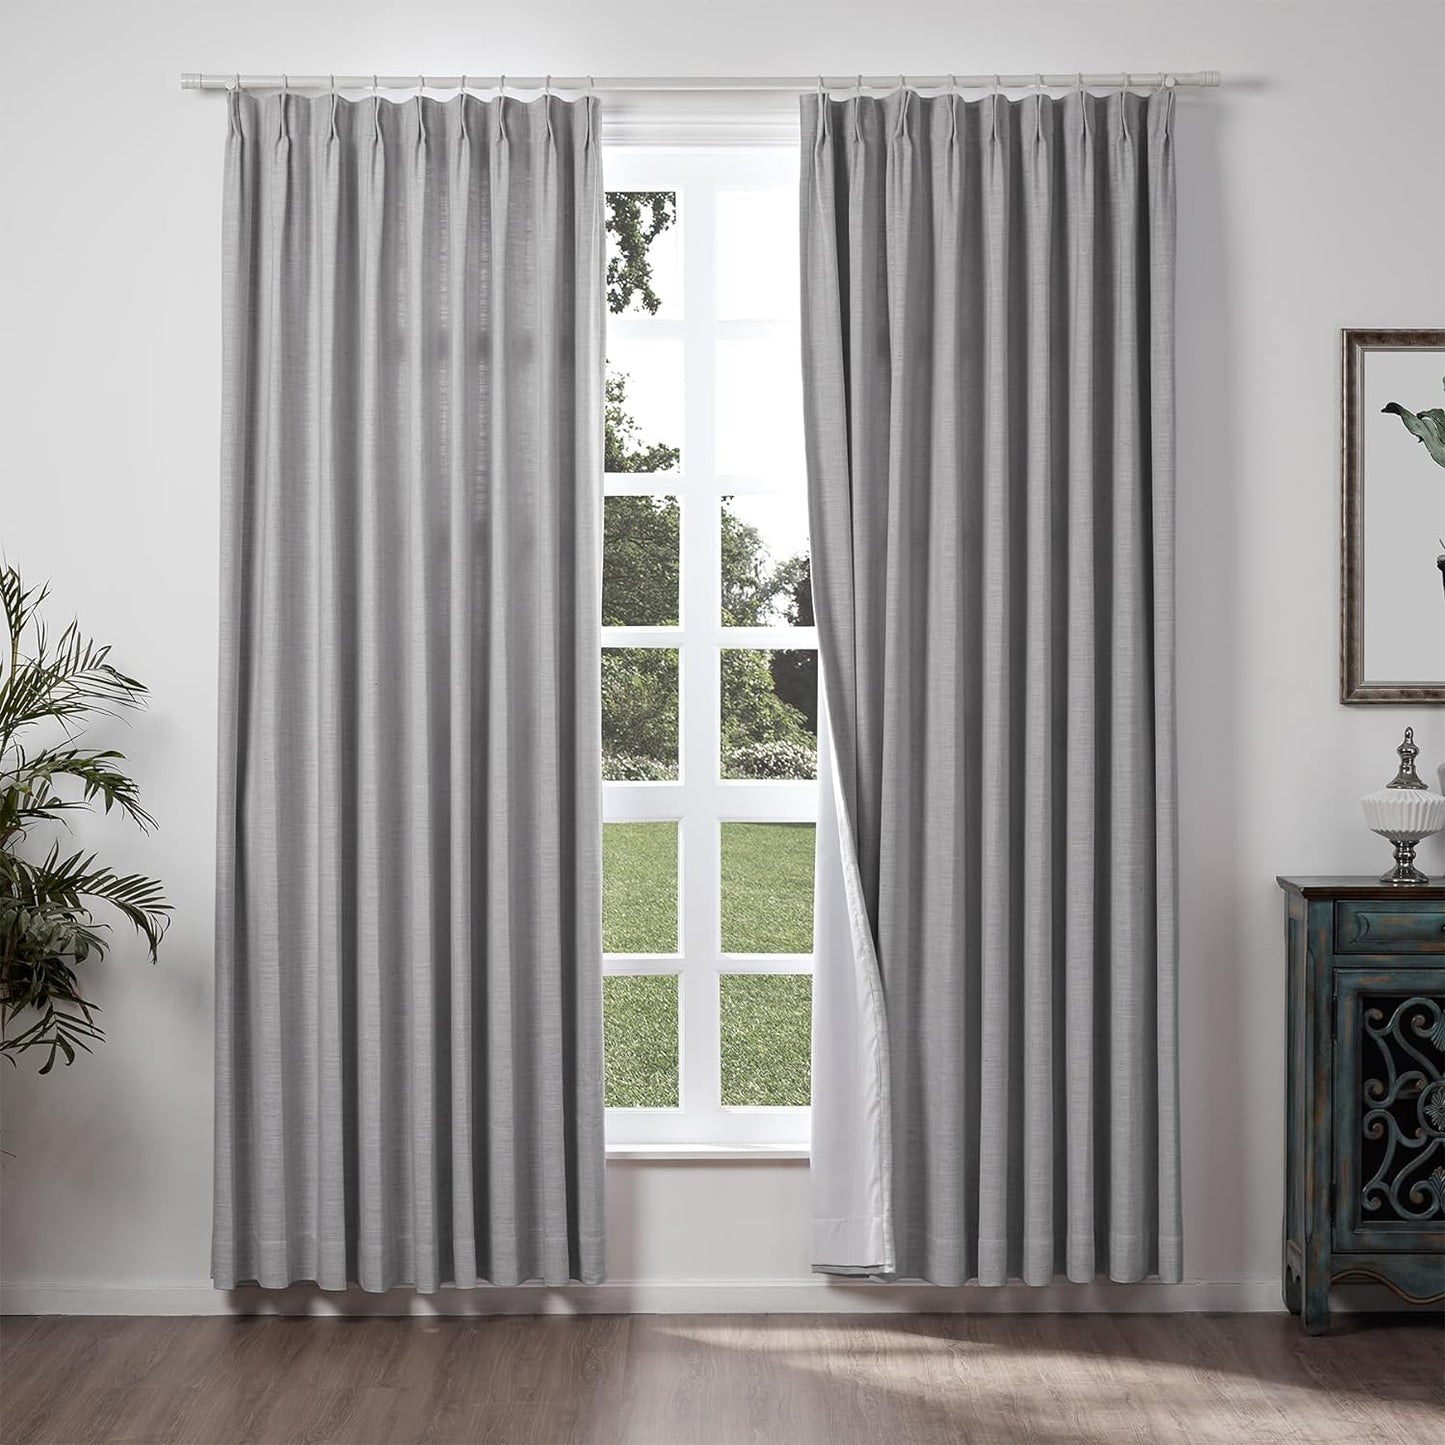 Chadmade 50" W X 63" L Polyester Linen Drape with Blackout Lining Pinch Pleat Curtain for Sliding Door Patio Door Living Room Bedroom, (1 Panel) Sand Beige Tallis Collection  ChadMade Rock Grey (12) 84Wx84L 